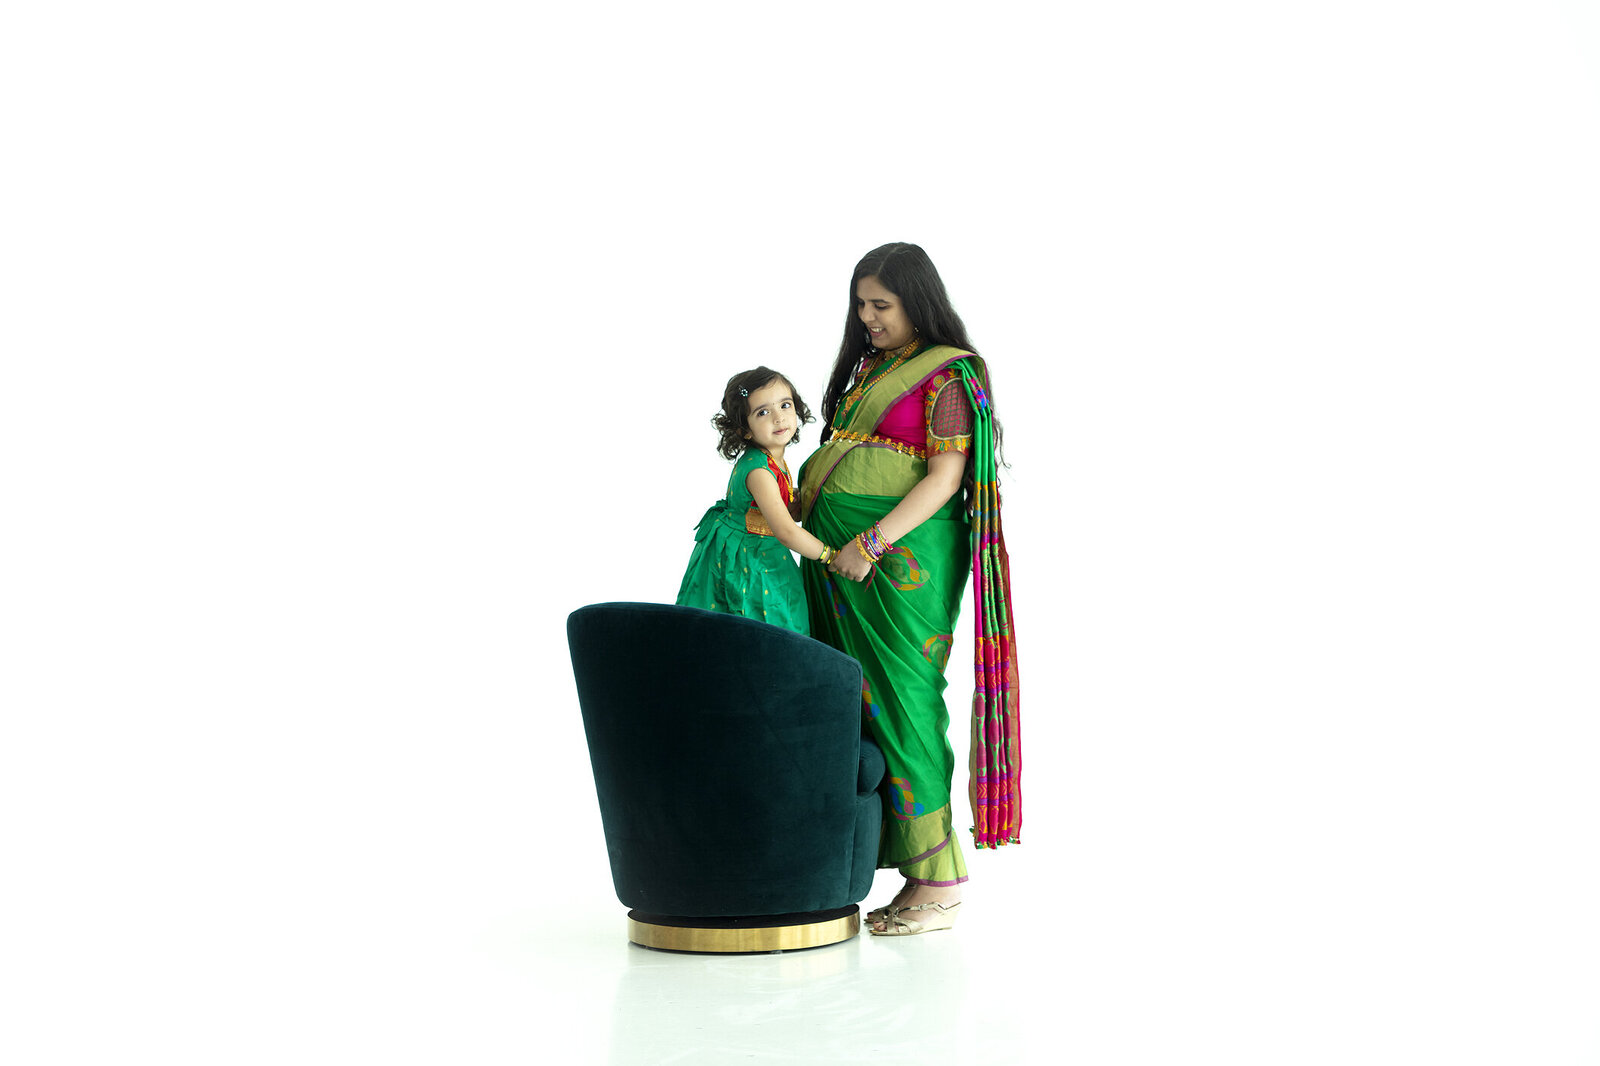 Mother and daughter wearing traditional Indian clothing pose at Maternity photoshoot.